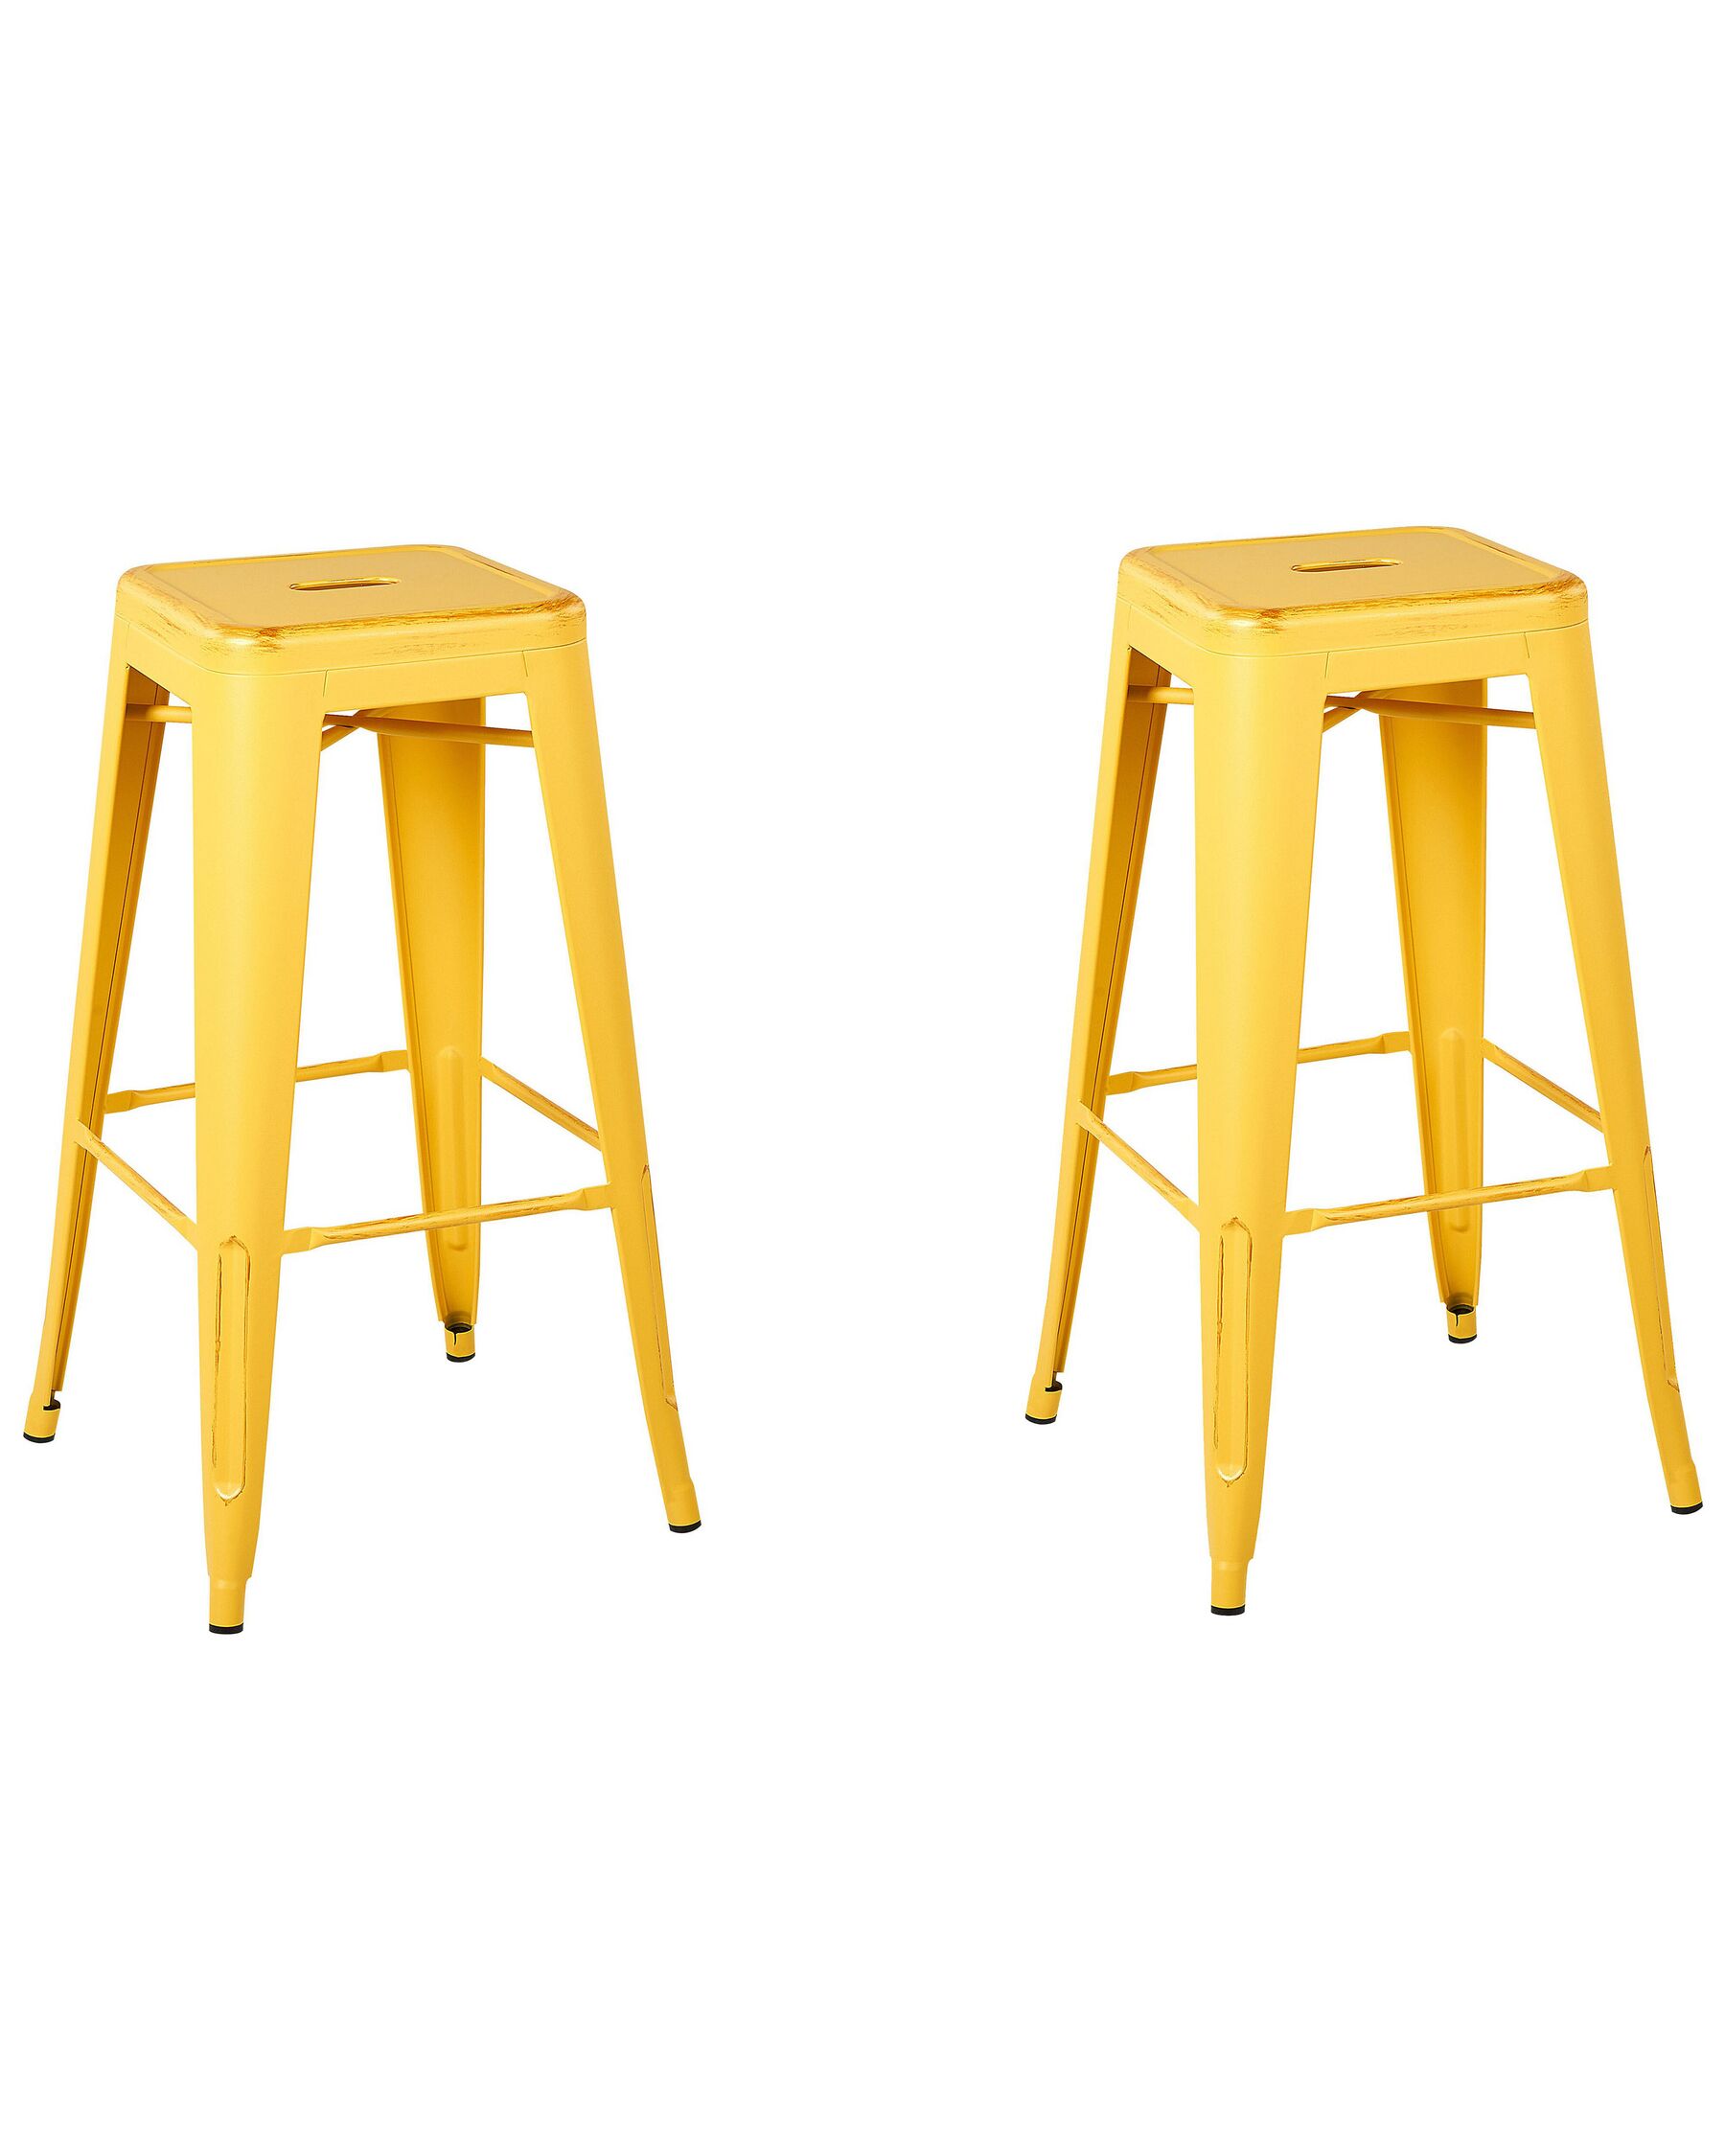 Set of 2 Steel Stools 76 cm Yellow with Gold CABRILLO_705323